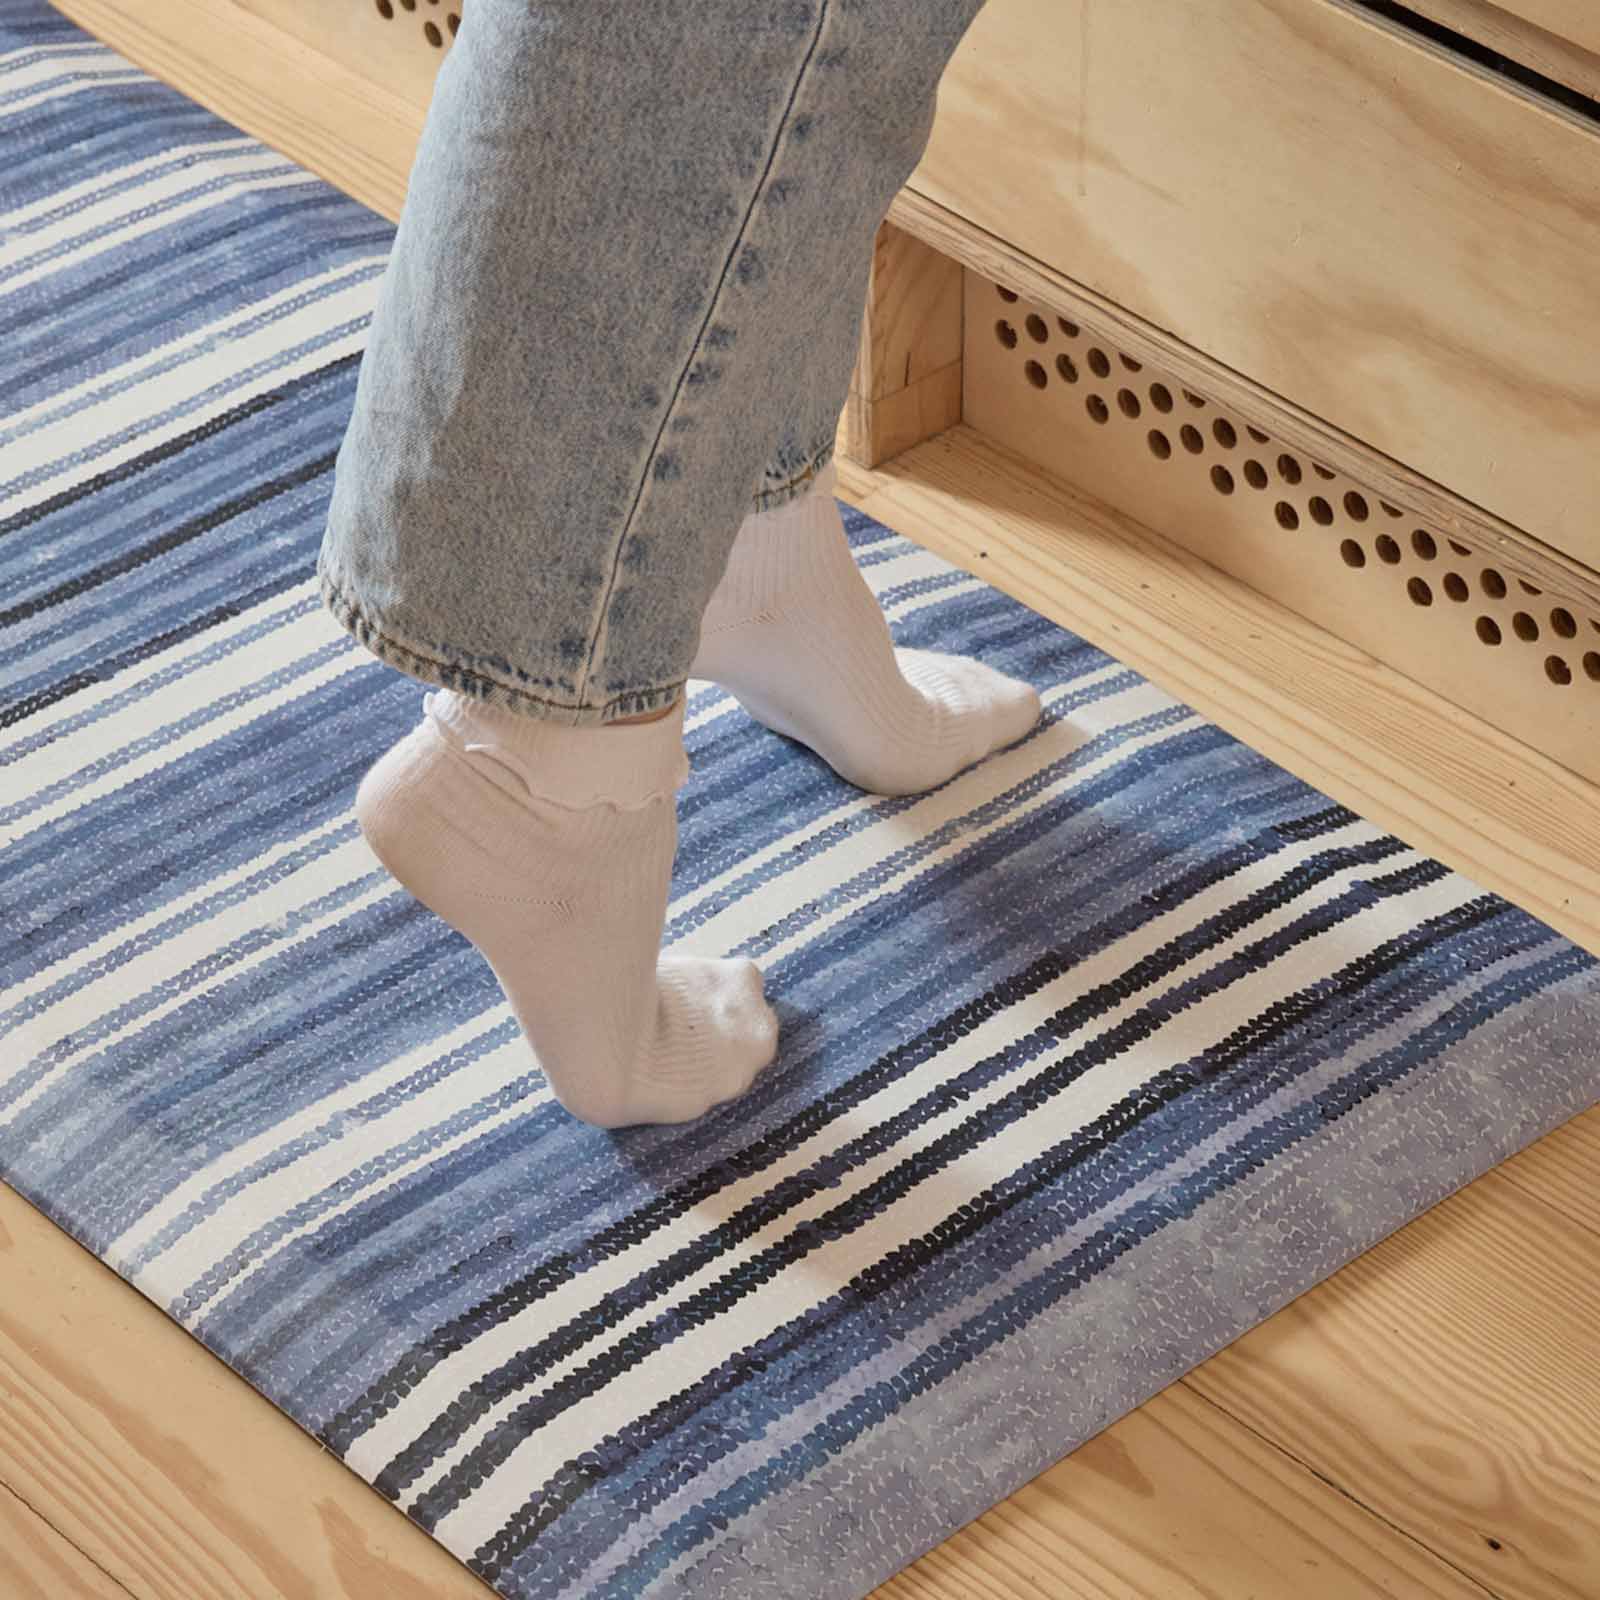 
Anti-Fatigue Bounce Back Foam
Like A Rug, But Better.
Experience our trademark cloudlike feel with the Nama Standing Mat. The super plush bounce-back foam reduces the stress put on your feet, knees and back from standing on hard surfaces. Each mat provides comfort when standing for long periods of time, so you can focus on the task at hand and leave the comfort to us.
